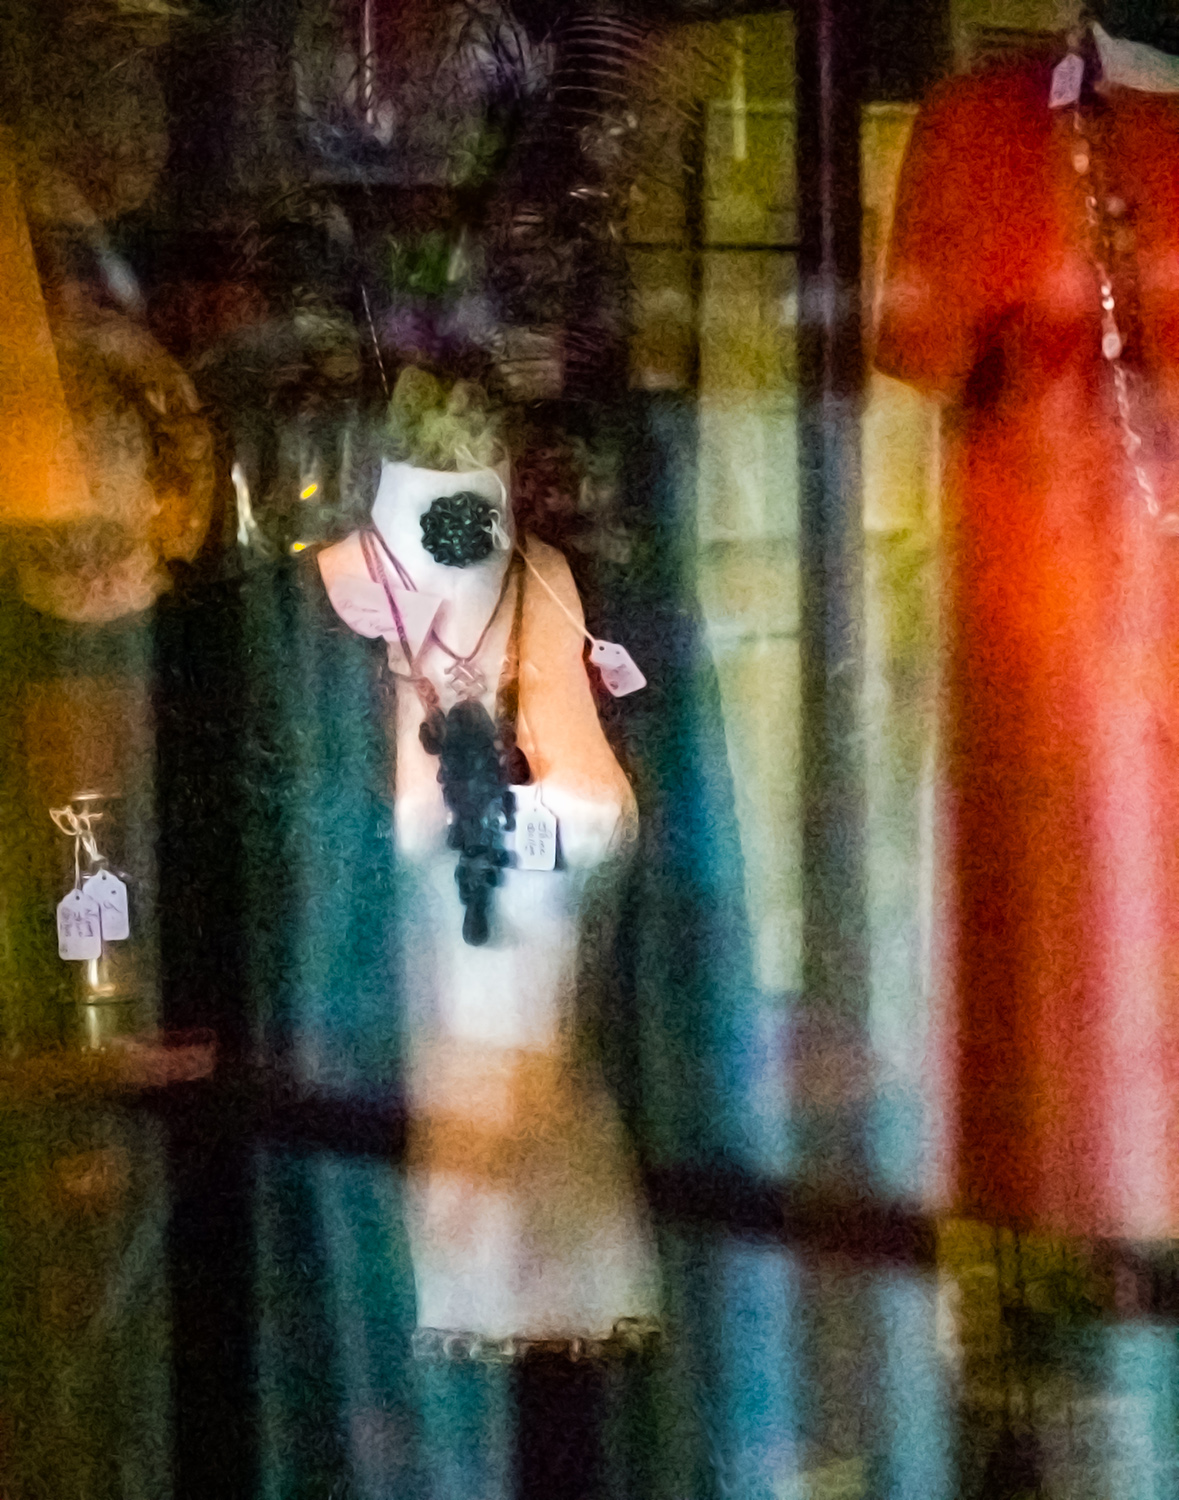 Reflections on glass over mannequin